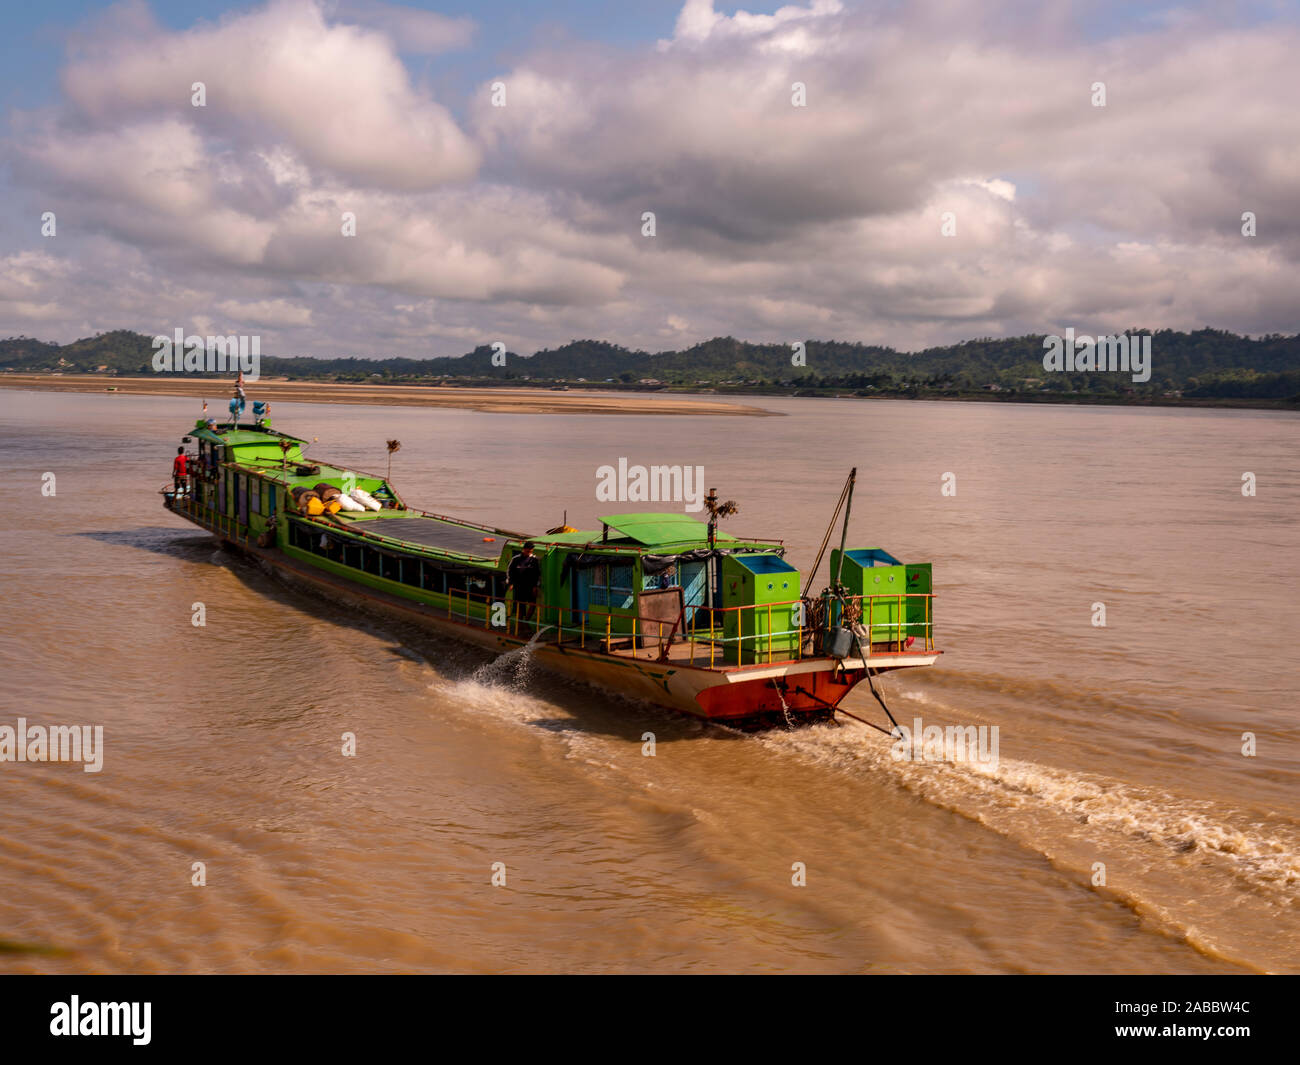 Water taxis and ferries ply the waters of the Chindwin River in northwestern Myanmar (Burma) with both passengers and freight being transported Stock Photo